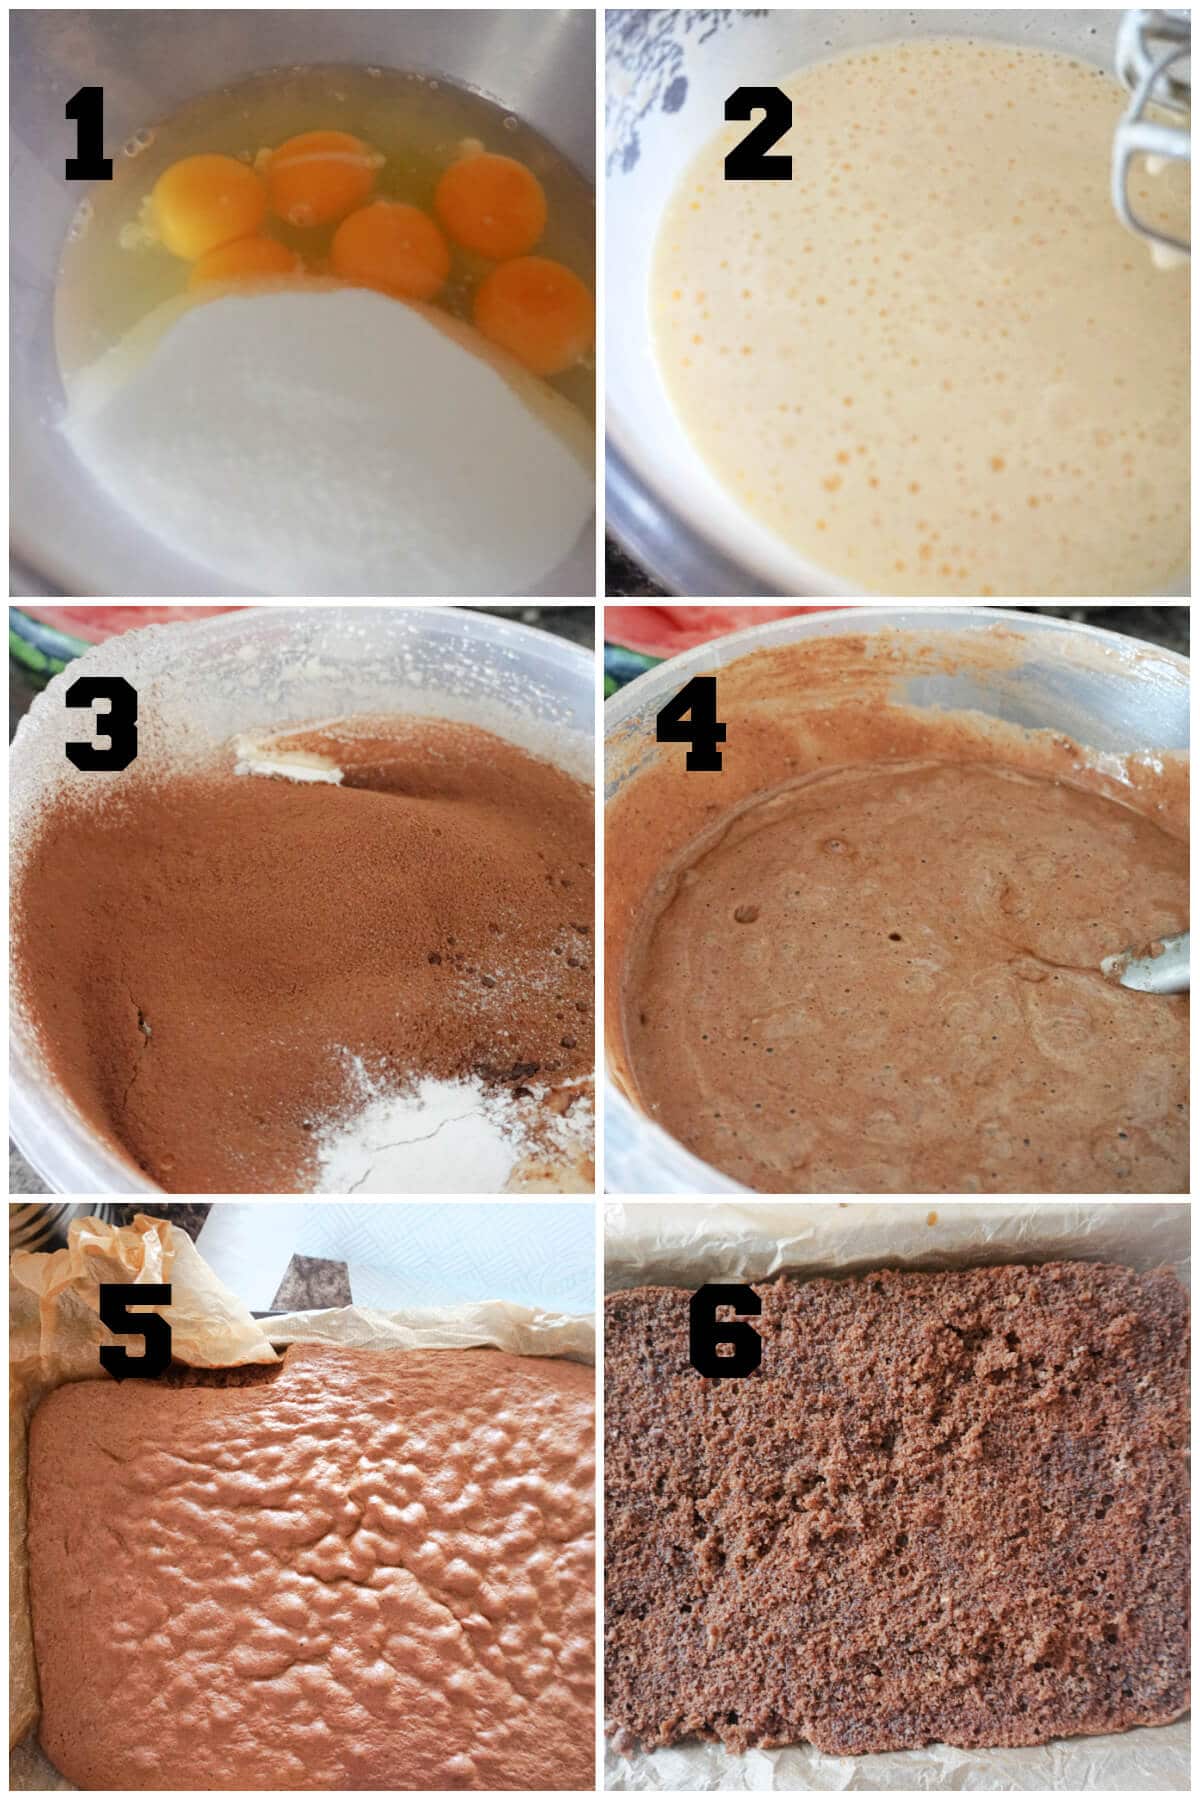 Collage of 6 photos to show how to make a chocolate sponge for cakes